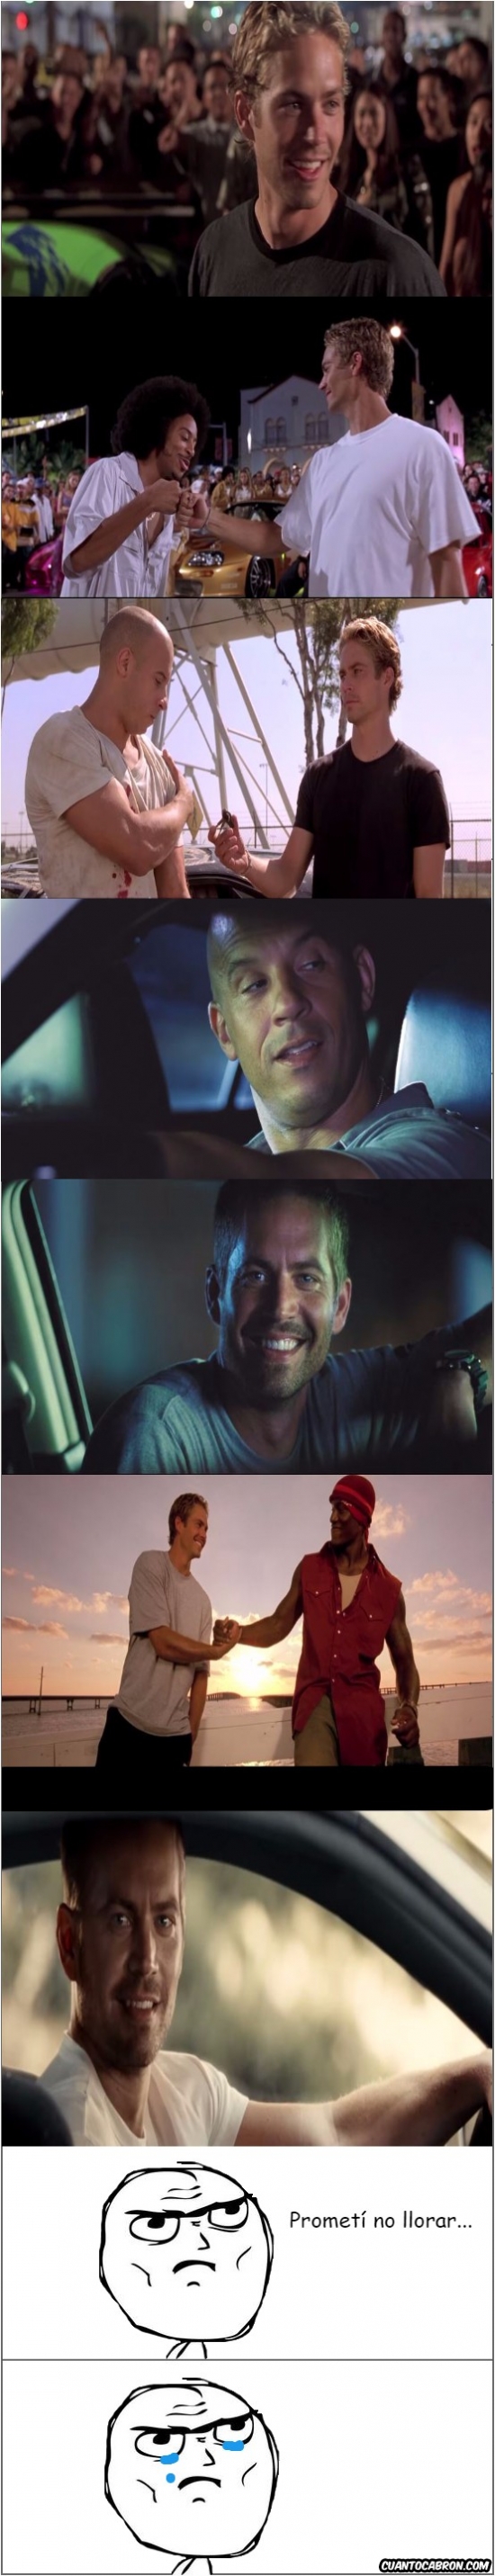 coches,determined,Fast and furious,hombre,lagrimas,llorar,Paul Walker